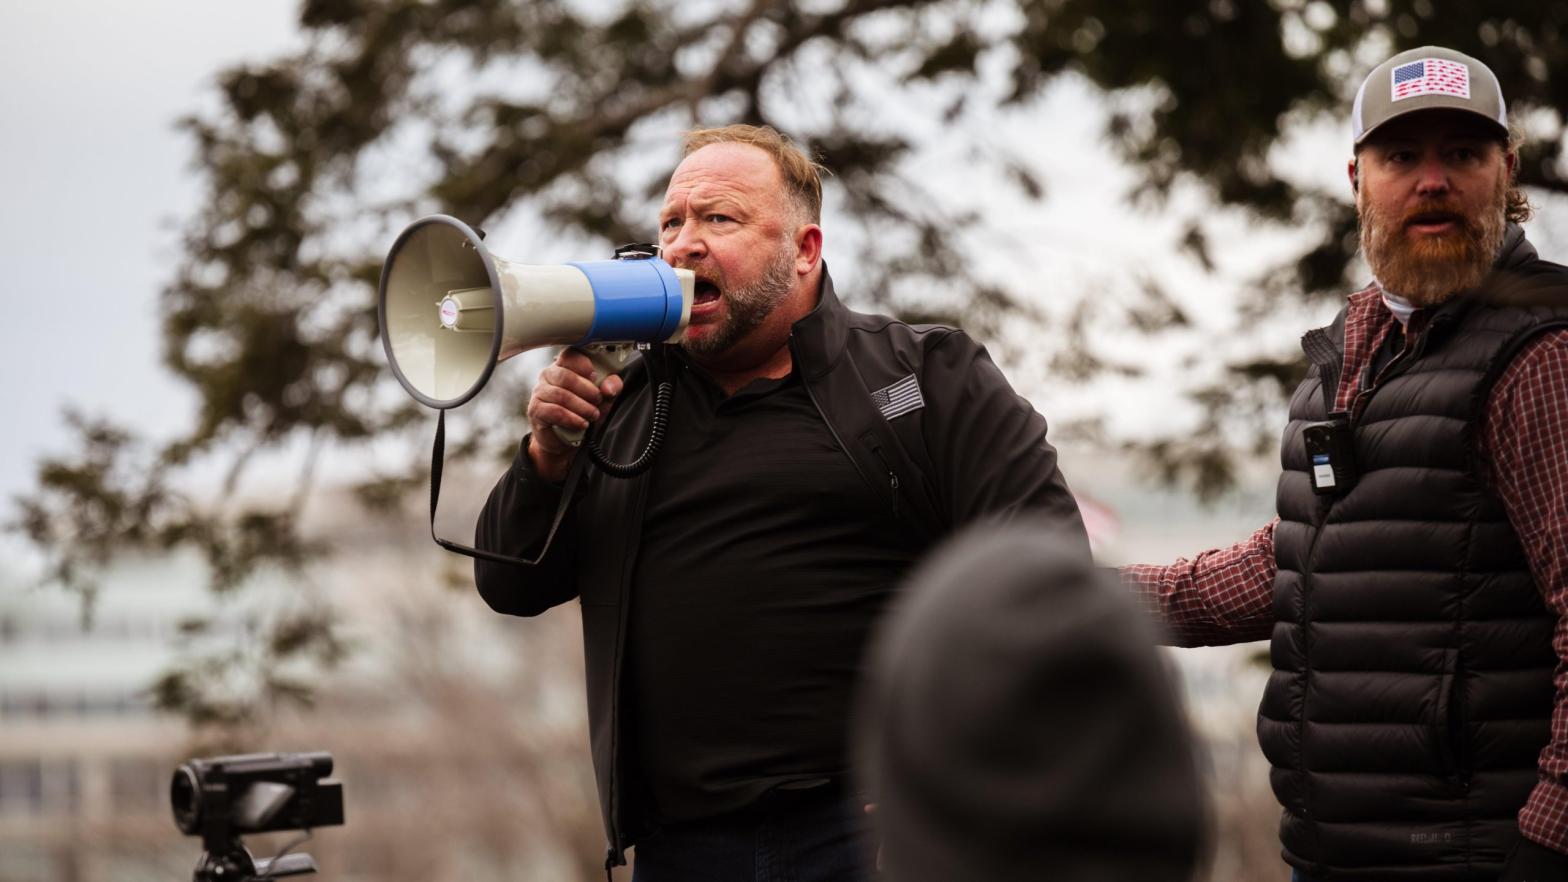 Alex Jones speaking outside the Capitol after Donald Trump supporters assaulted police and broke into the building en masse on Jan. 6, 2021. (Photo: Jon Cherry, Getty Images)